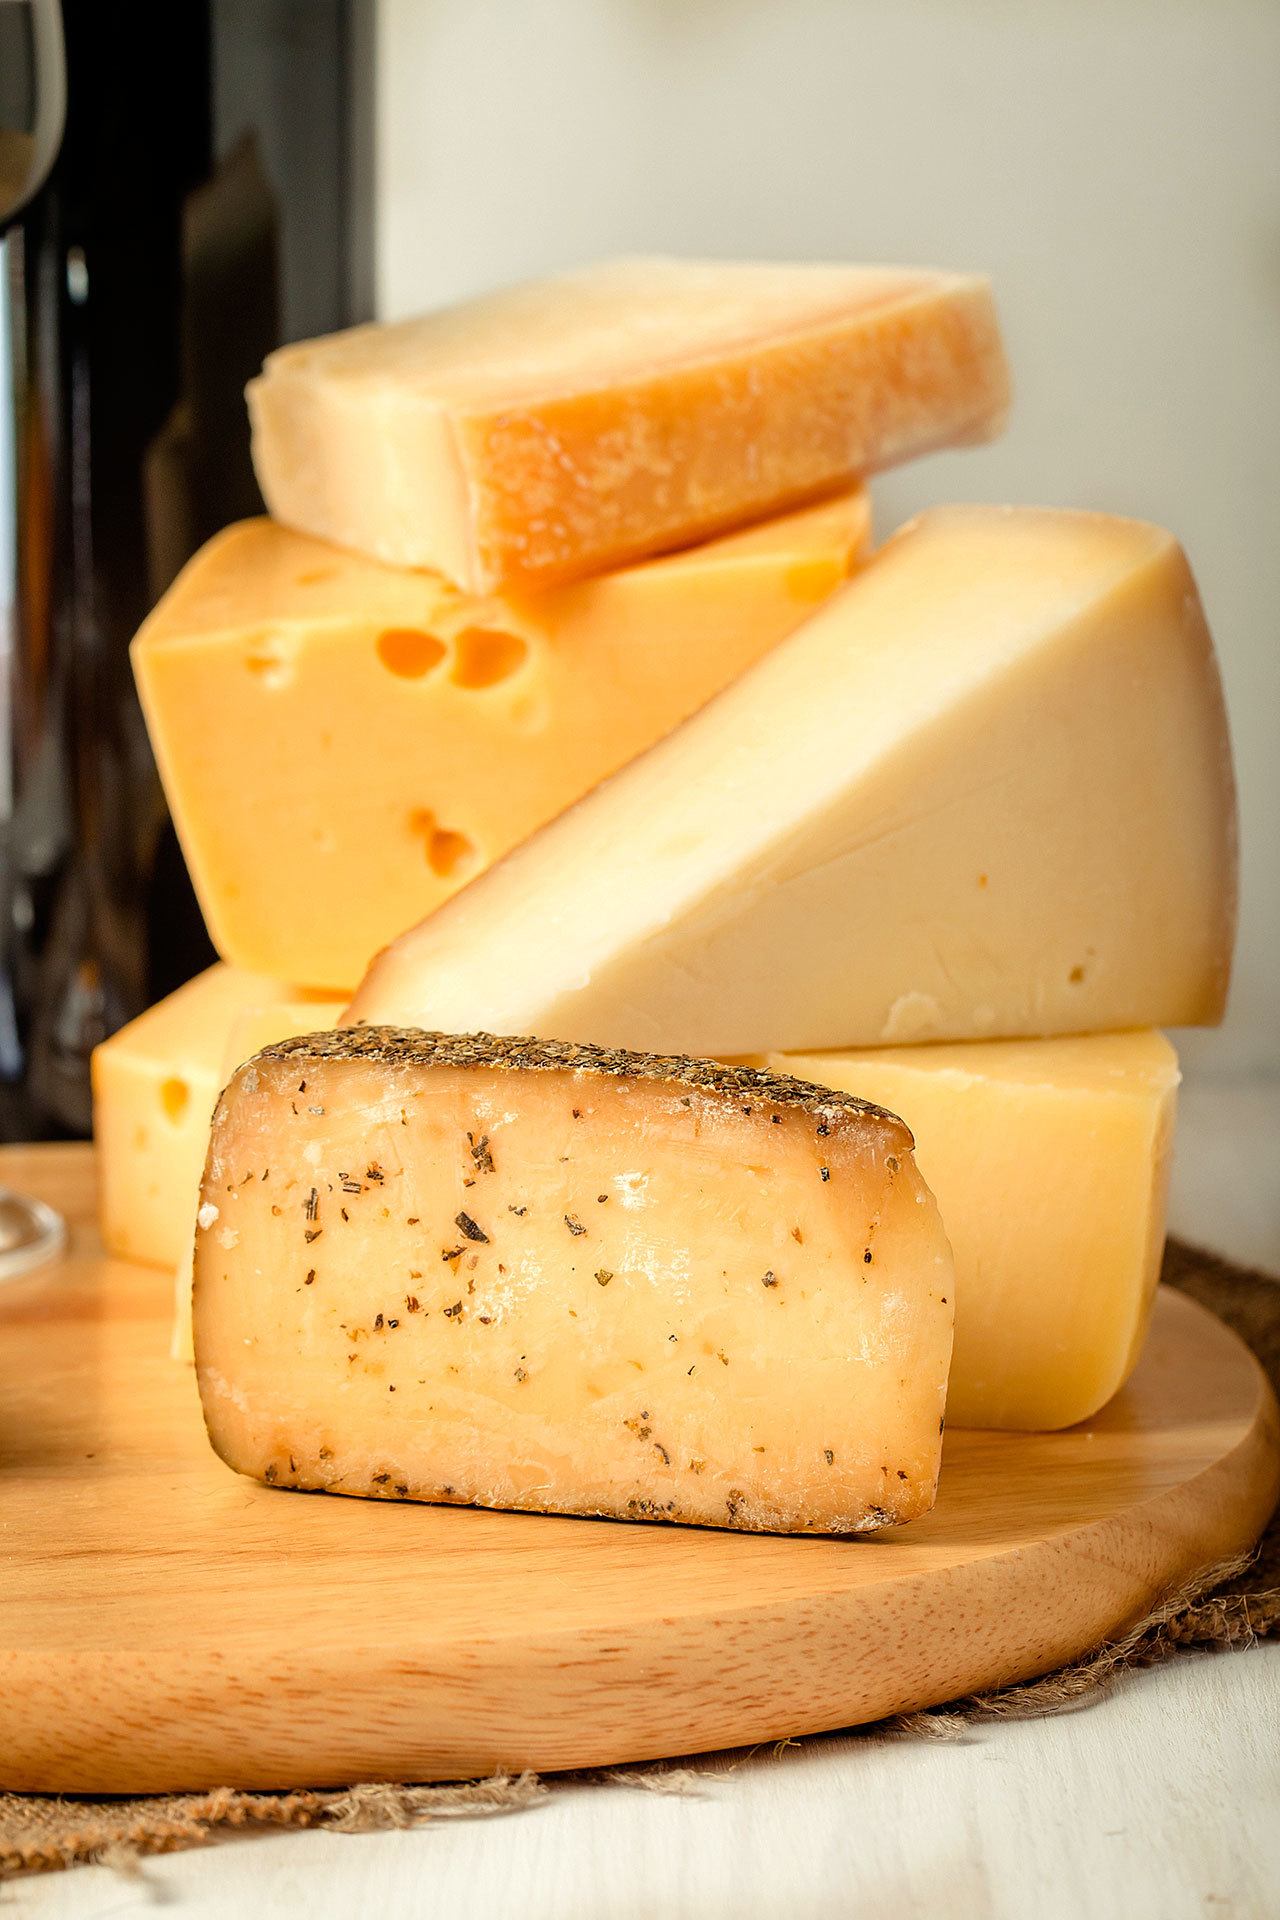 Try out a variety of cheeses at the Washington Artisan Cheesemakers Festival on Sept. 24.